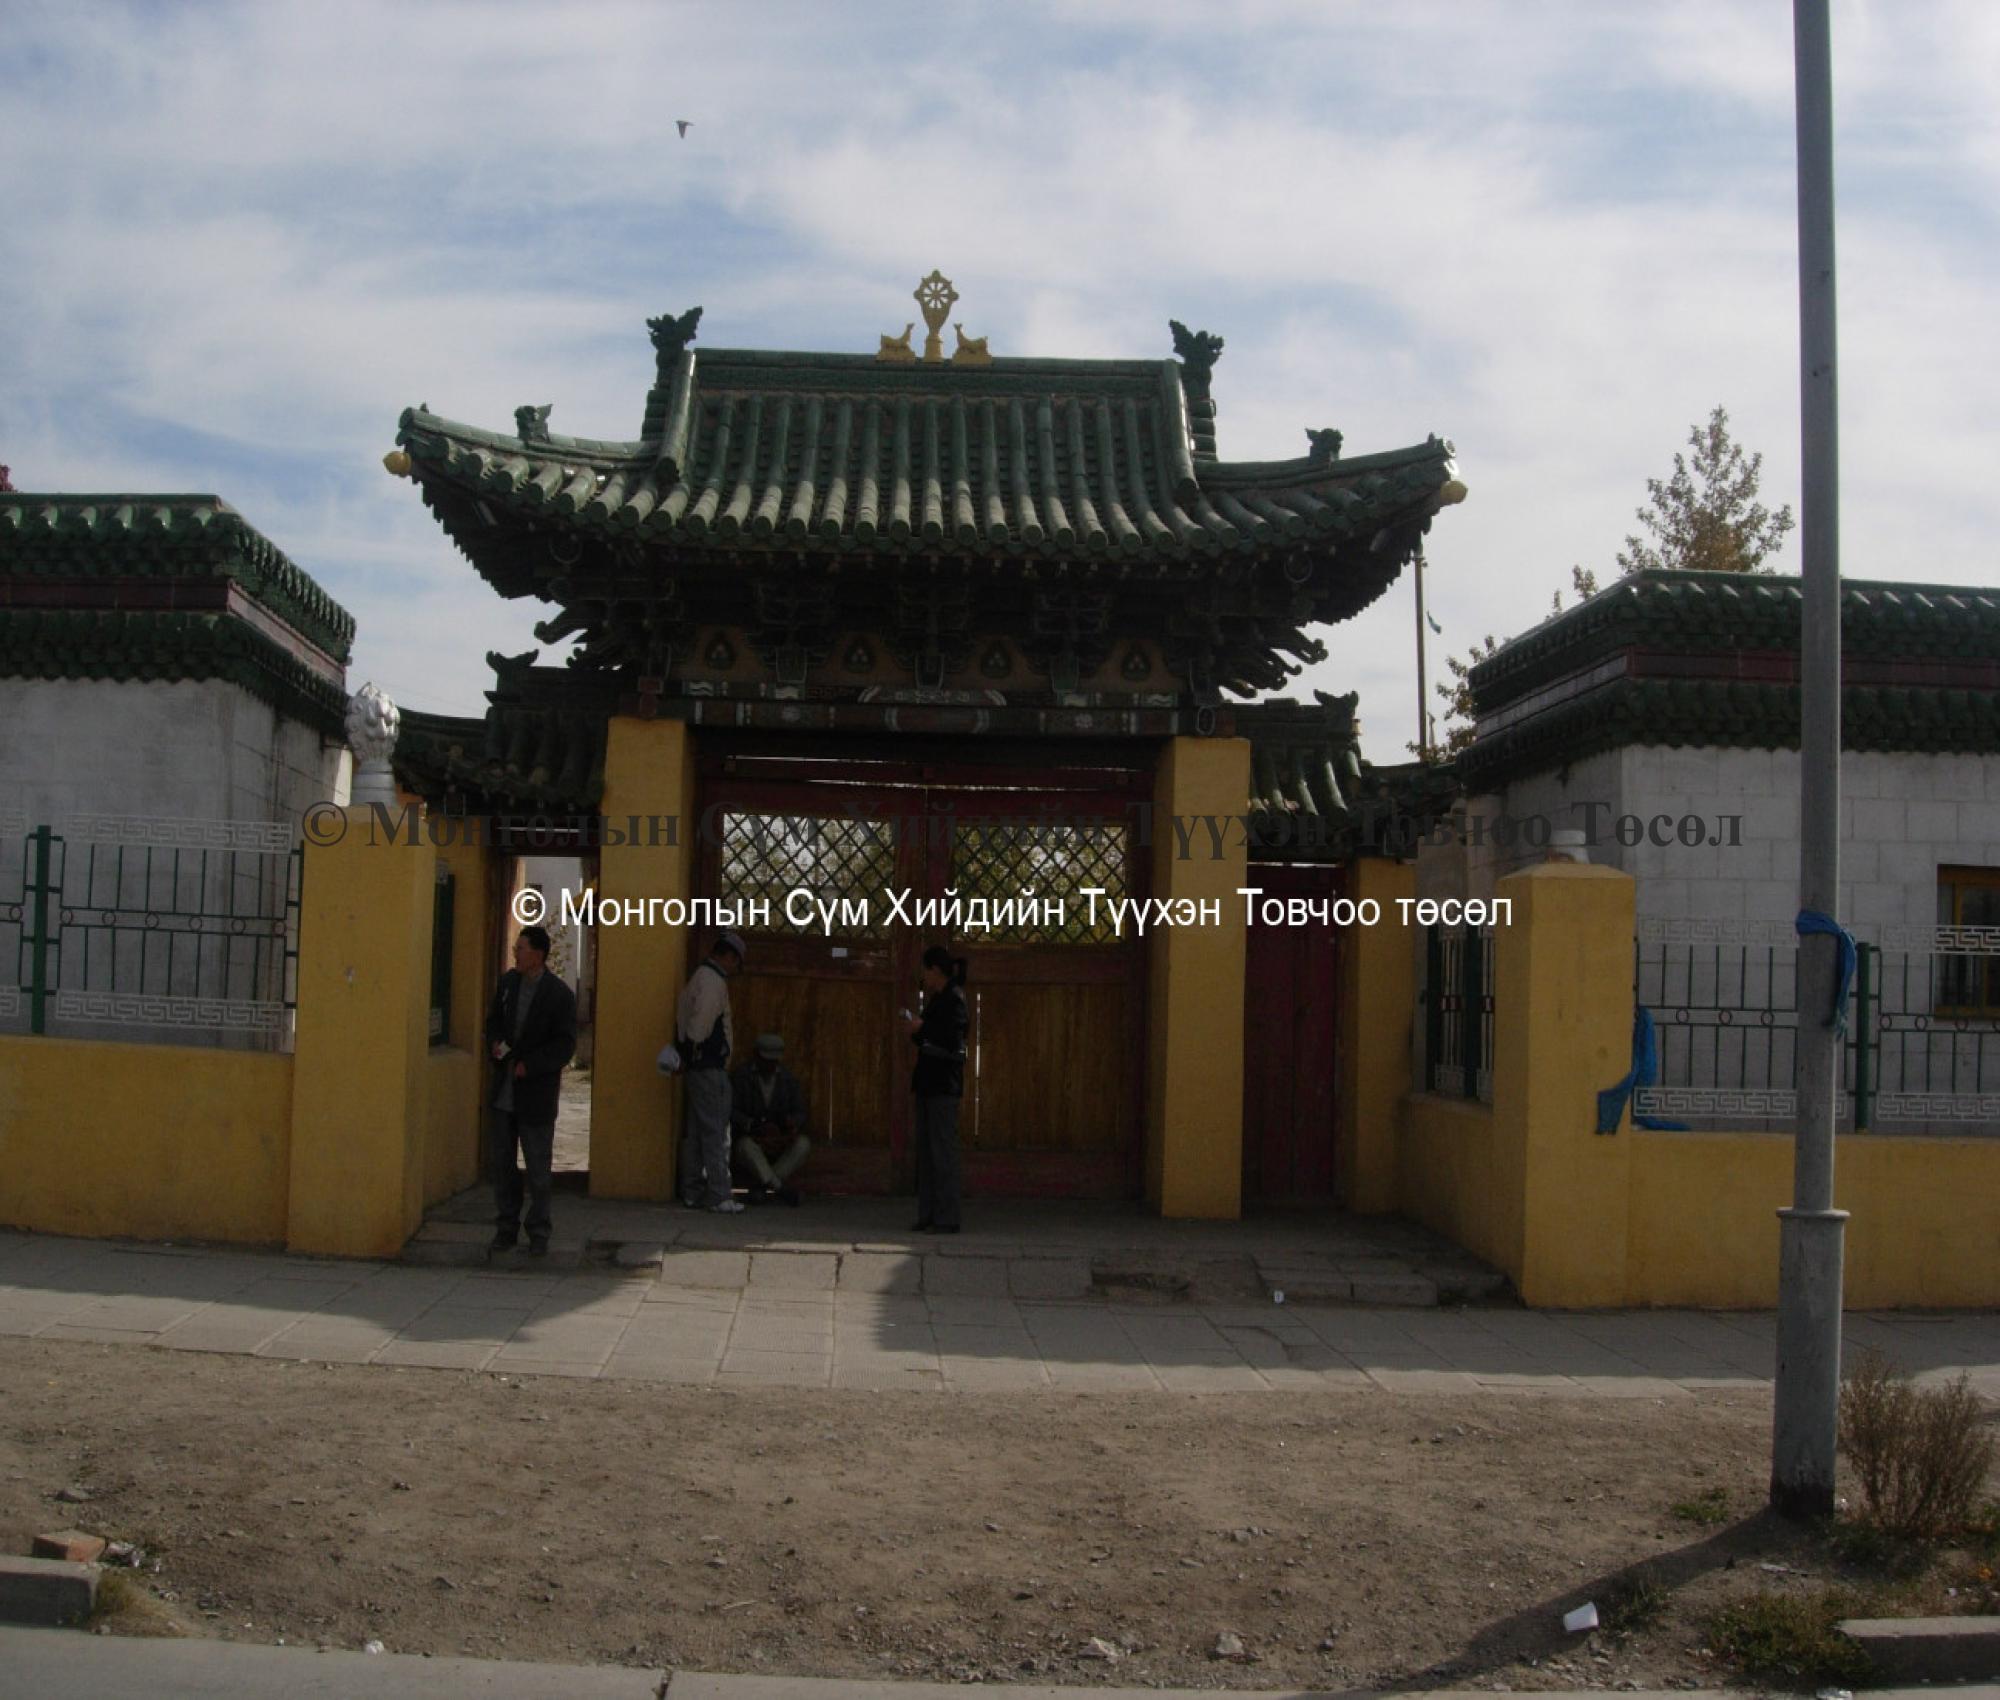 Main entrance gate (on the road)